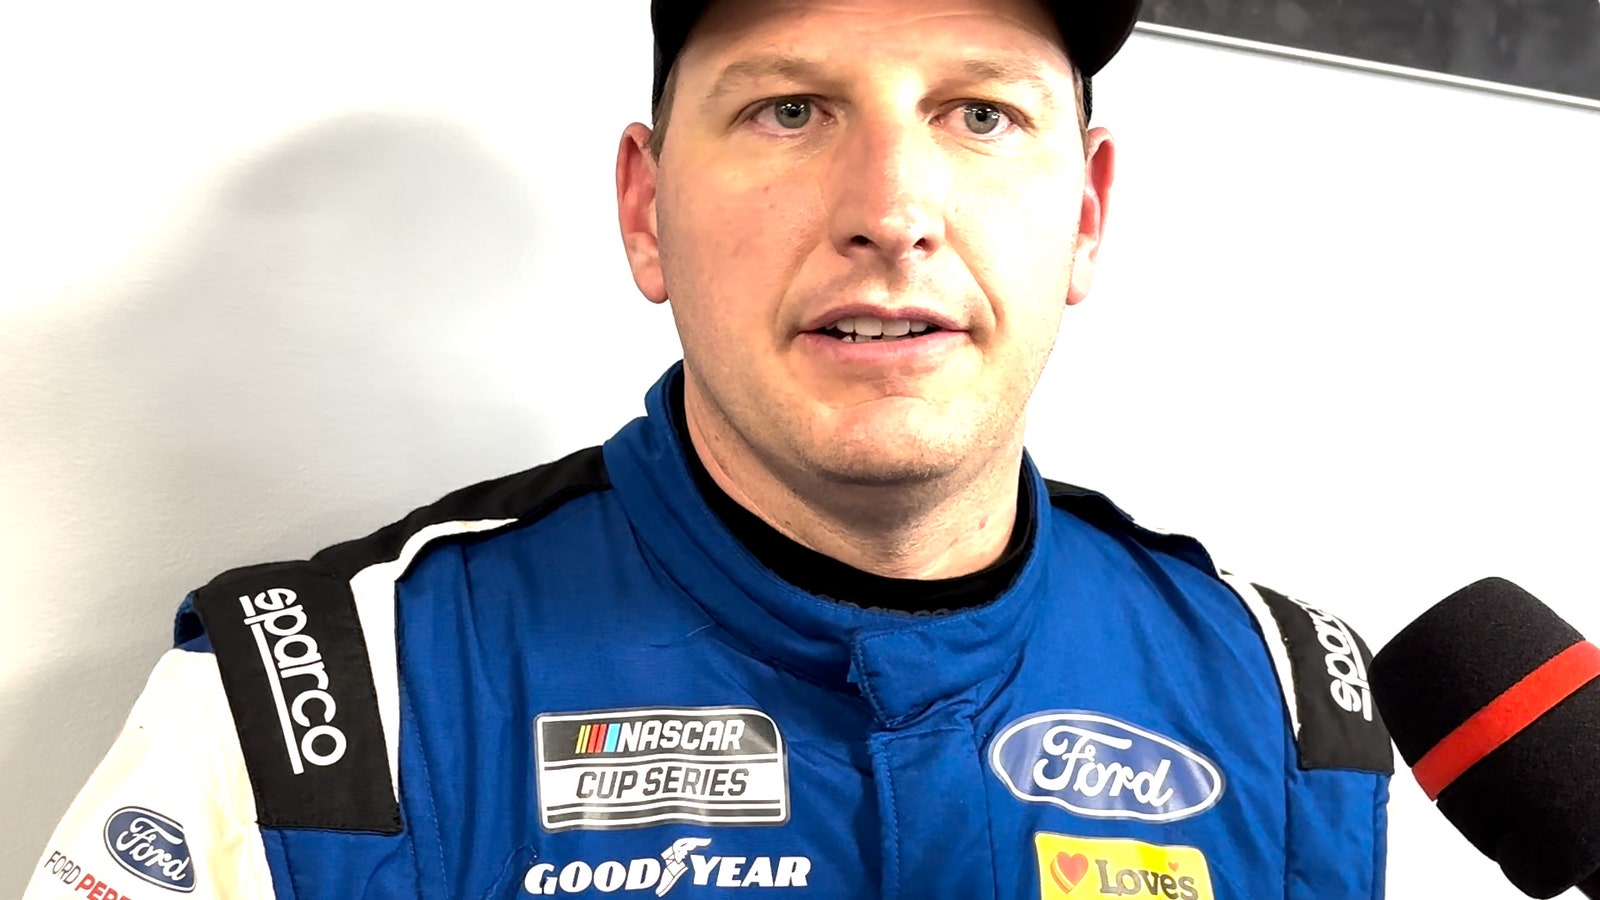 Michael McDowell discusses his Cup Series inexperience